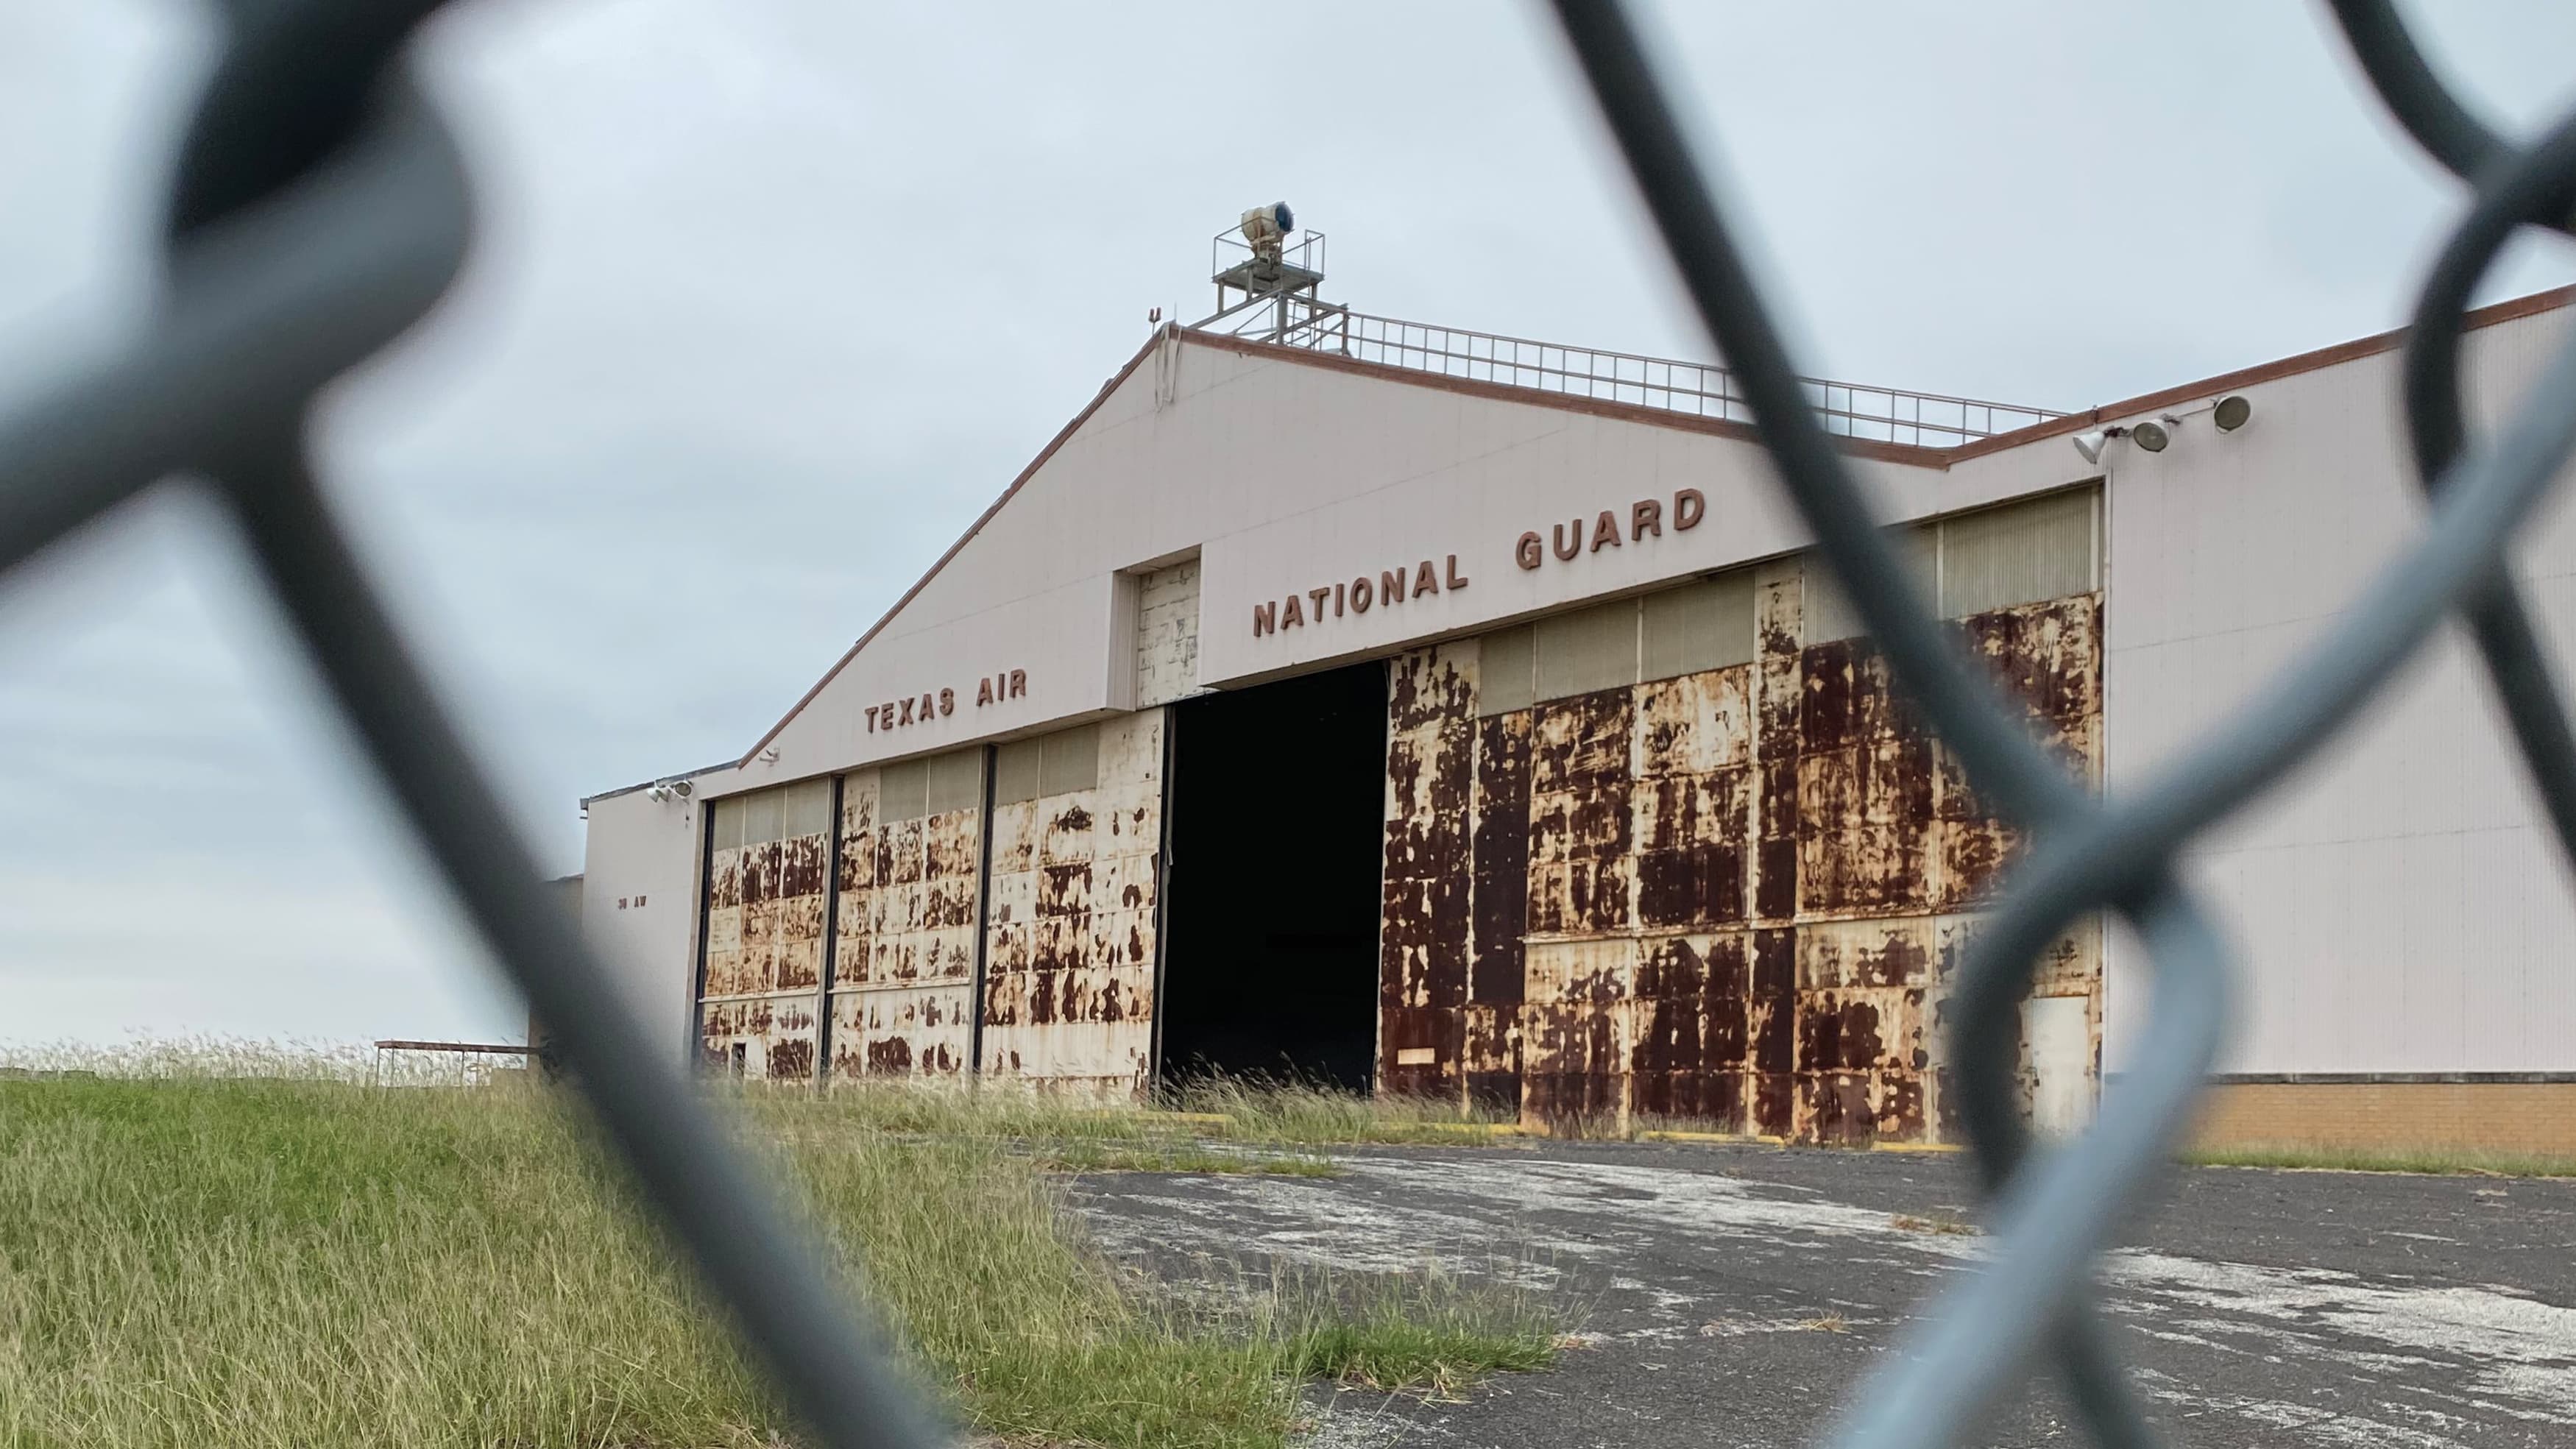 An old hangar at Hensley Field with Texas Air National Guard signage on the front